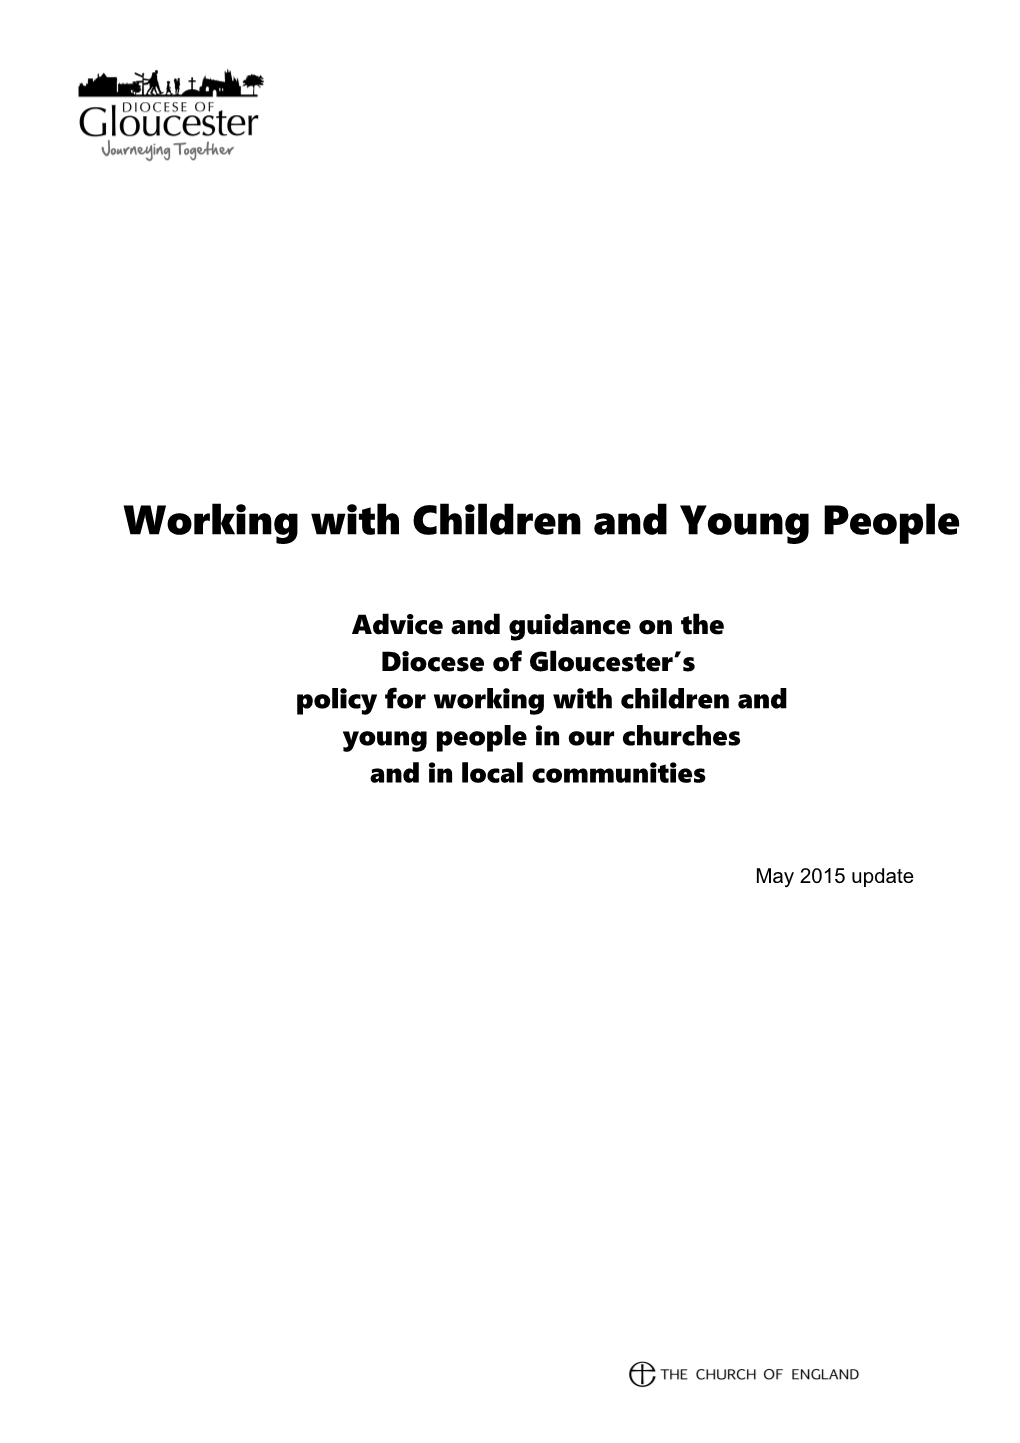 (A Similar Resource Document Is Available Focusing on Work with Adults Who May Be Vulnerable